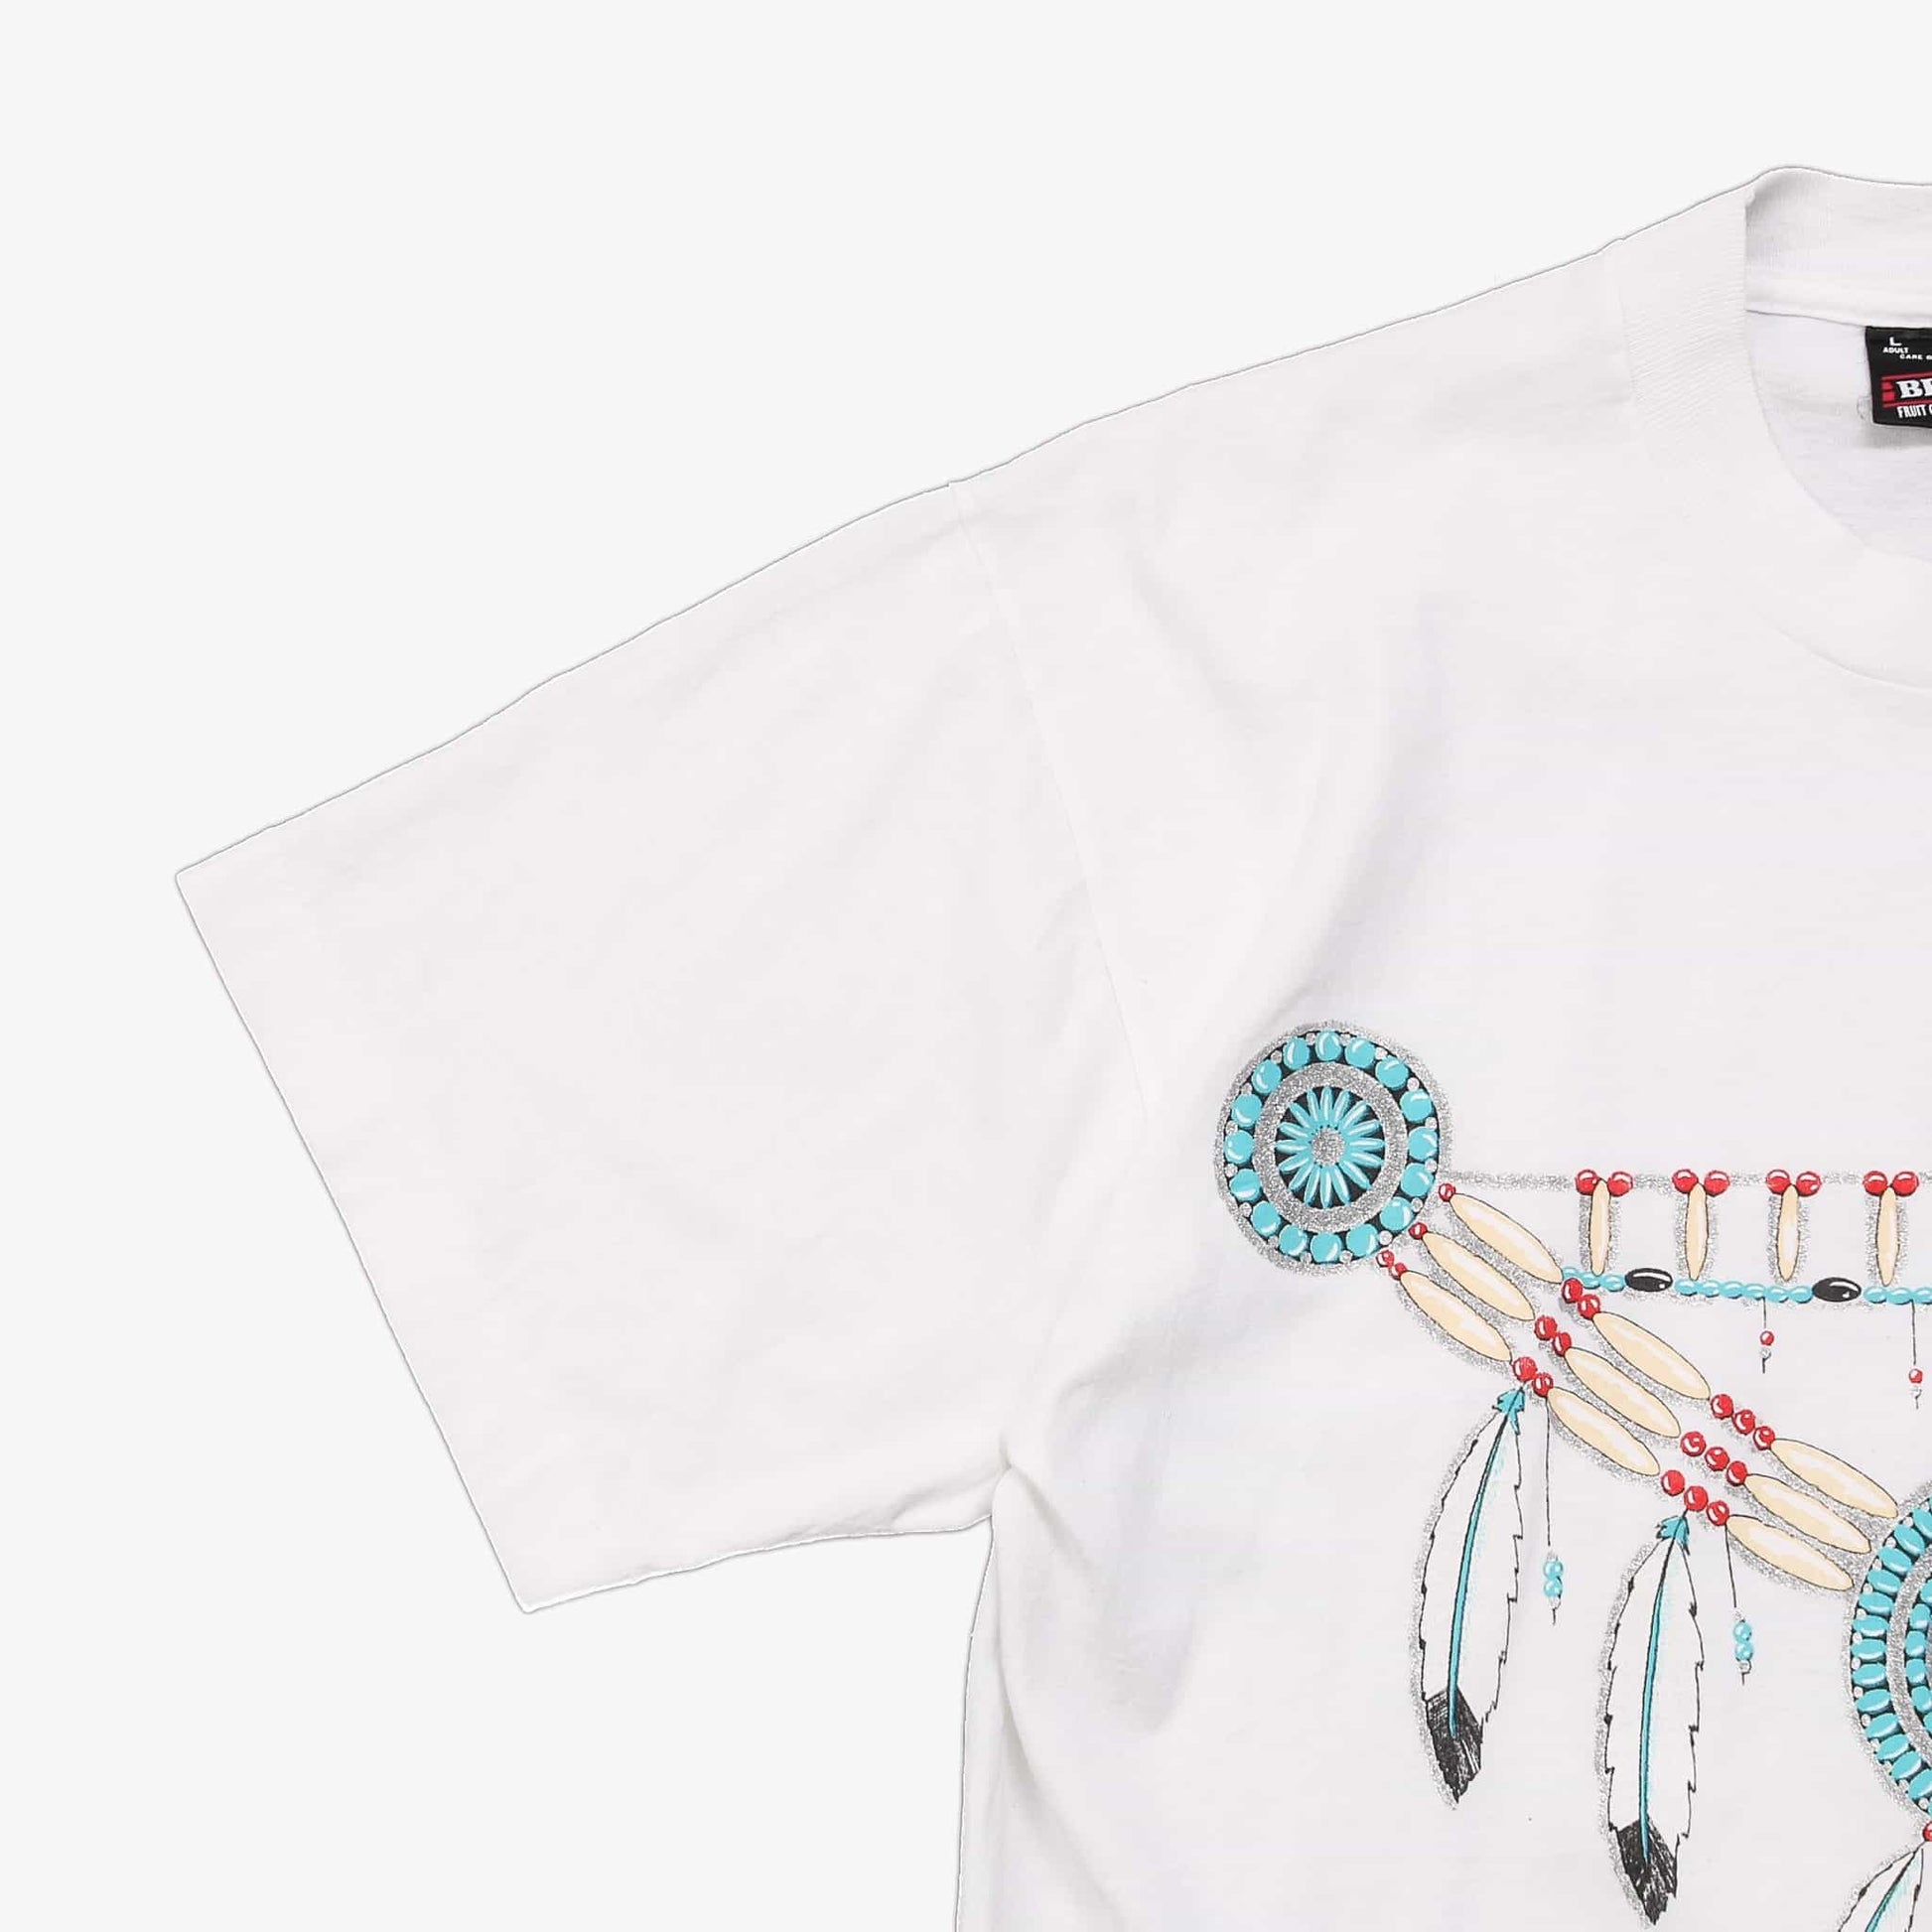 Vintage 'Native American' T-Shirt - American Madness